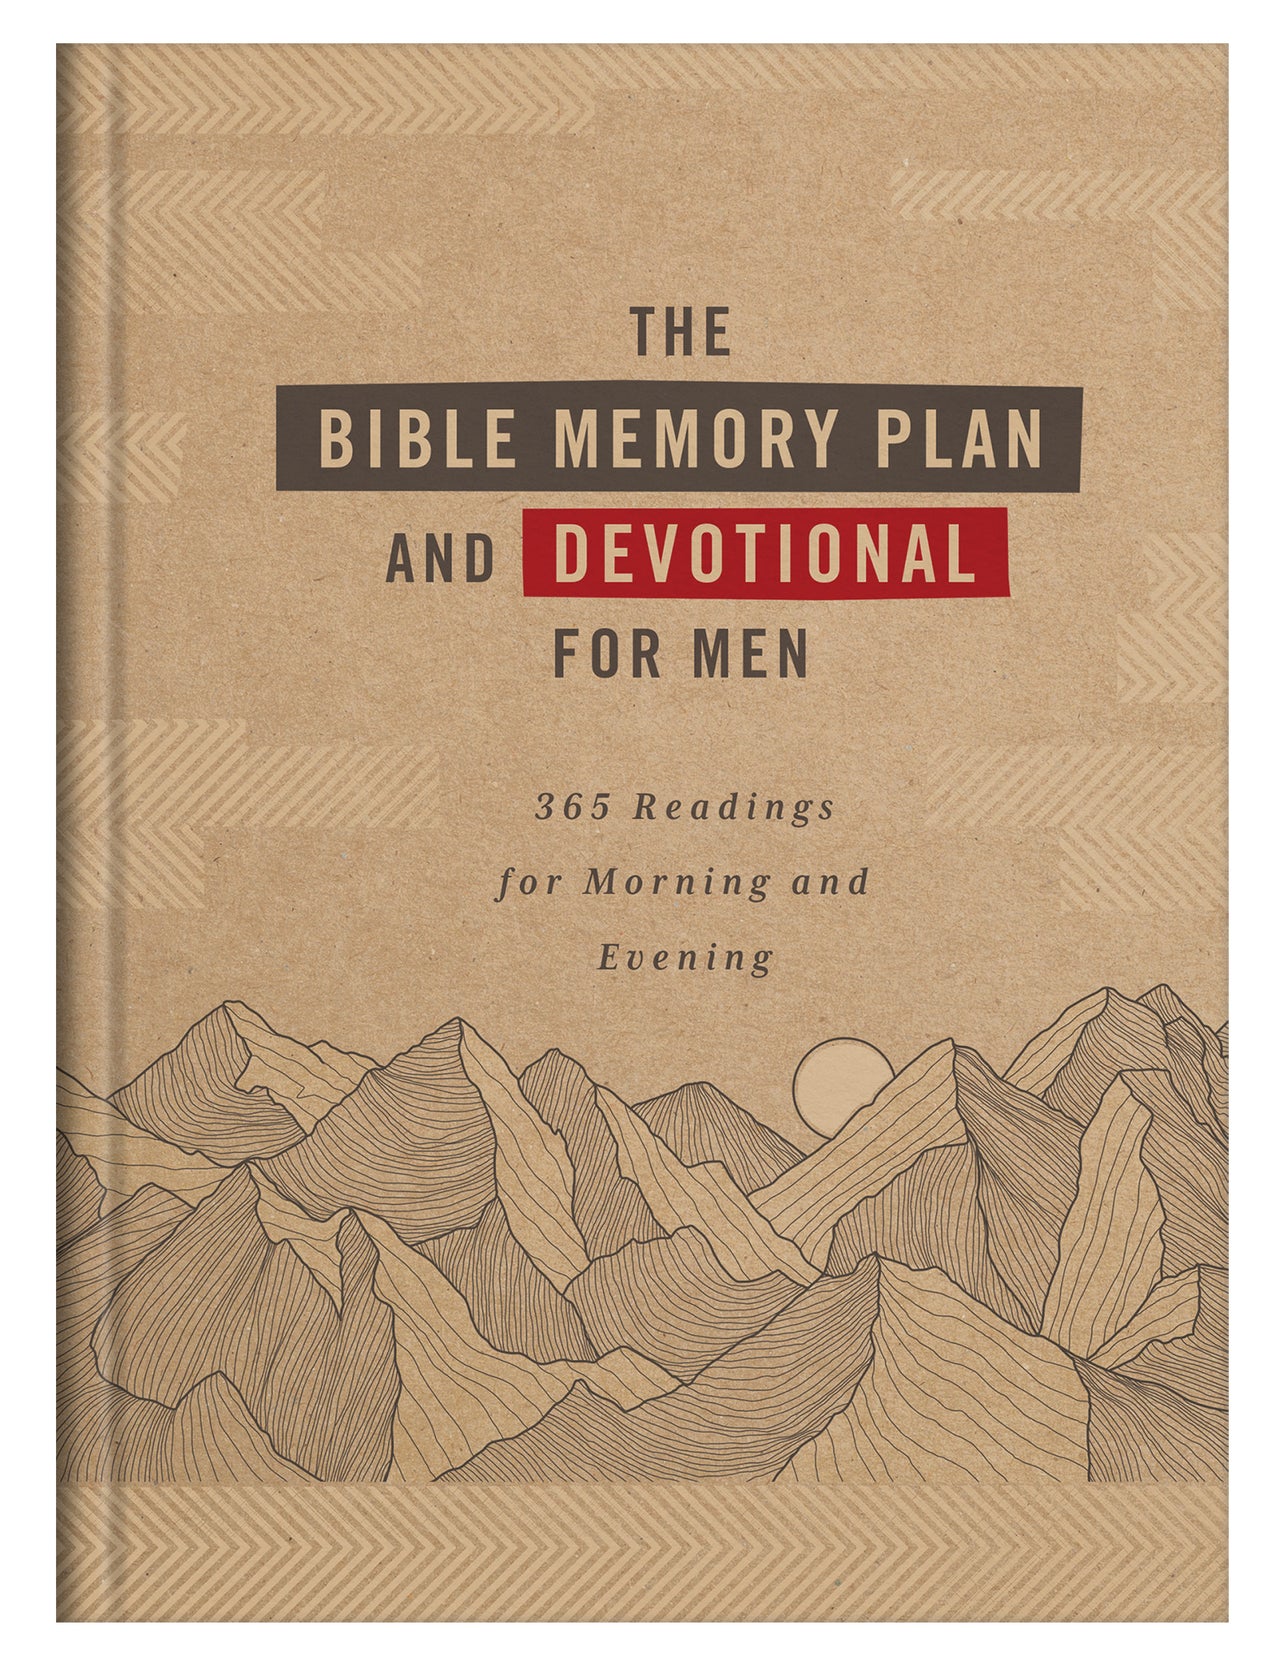 The Bible Memory Plan and Devotional for Men - Mercantile Mountain